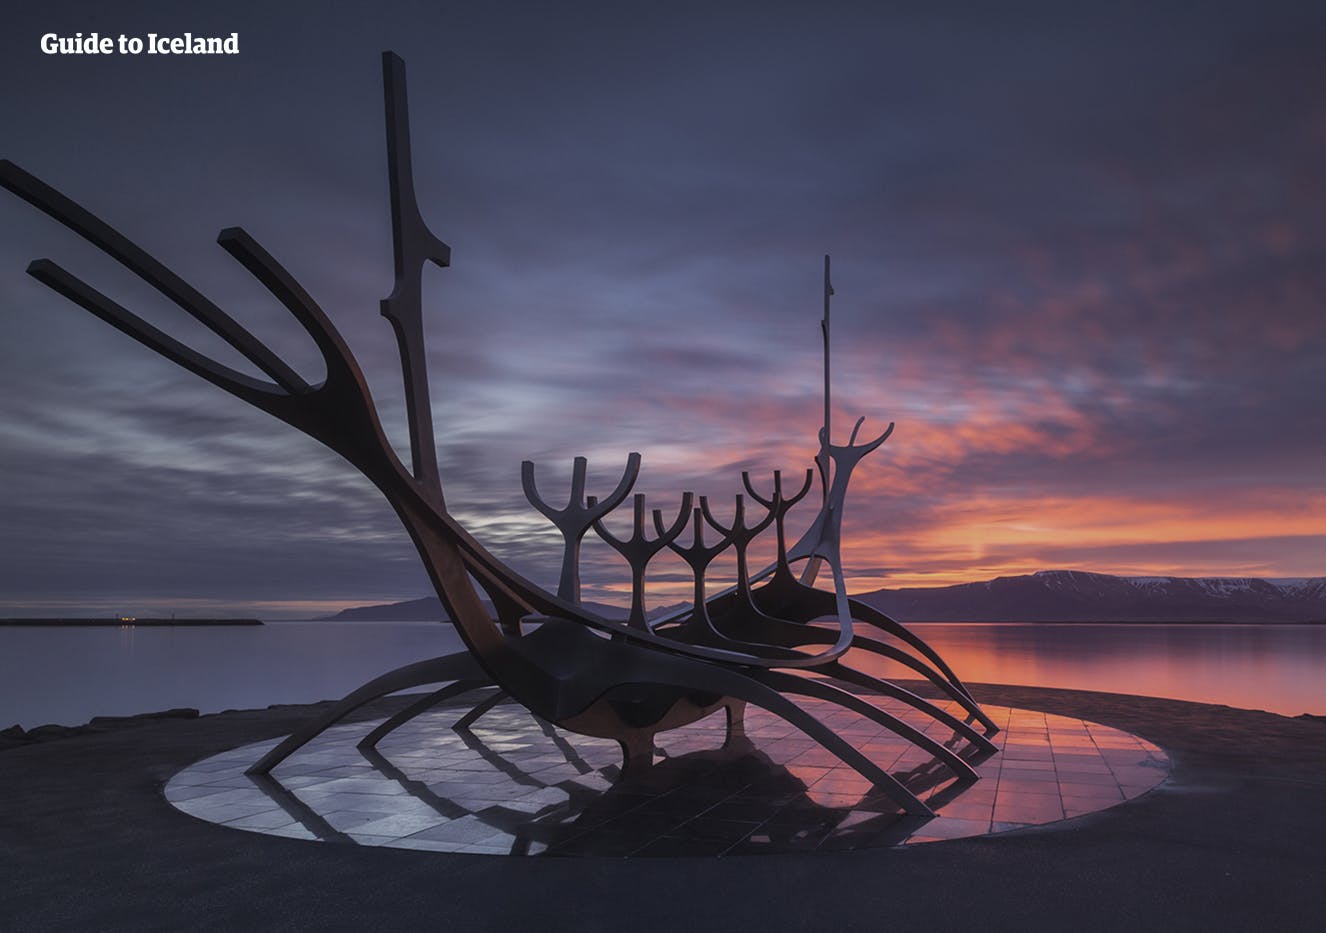 The Sun Voyager Monument sitting on the shore of Reykjavik at sunset.